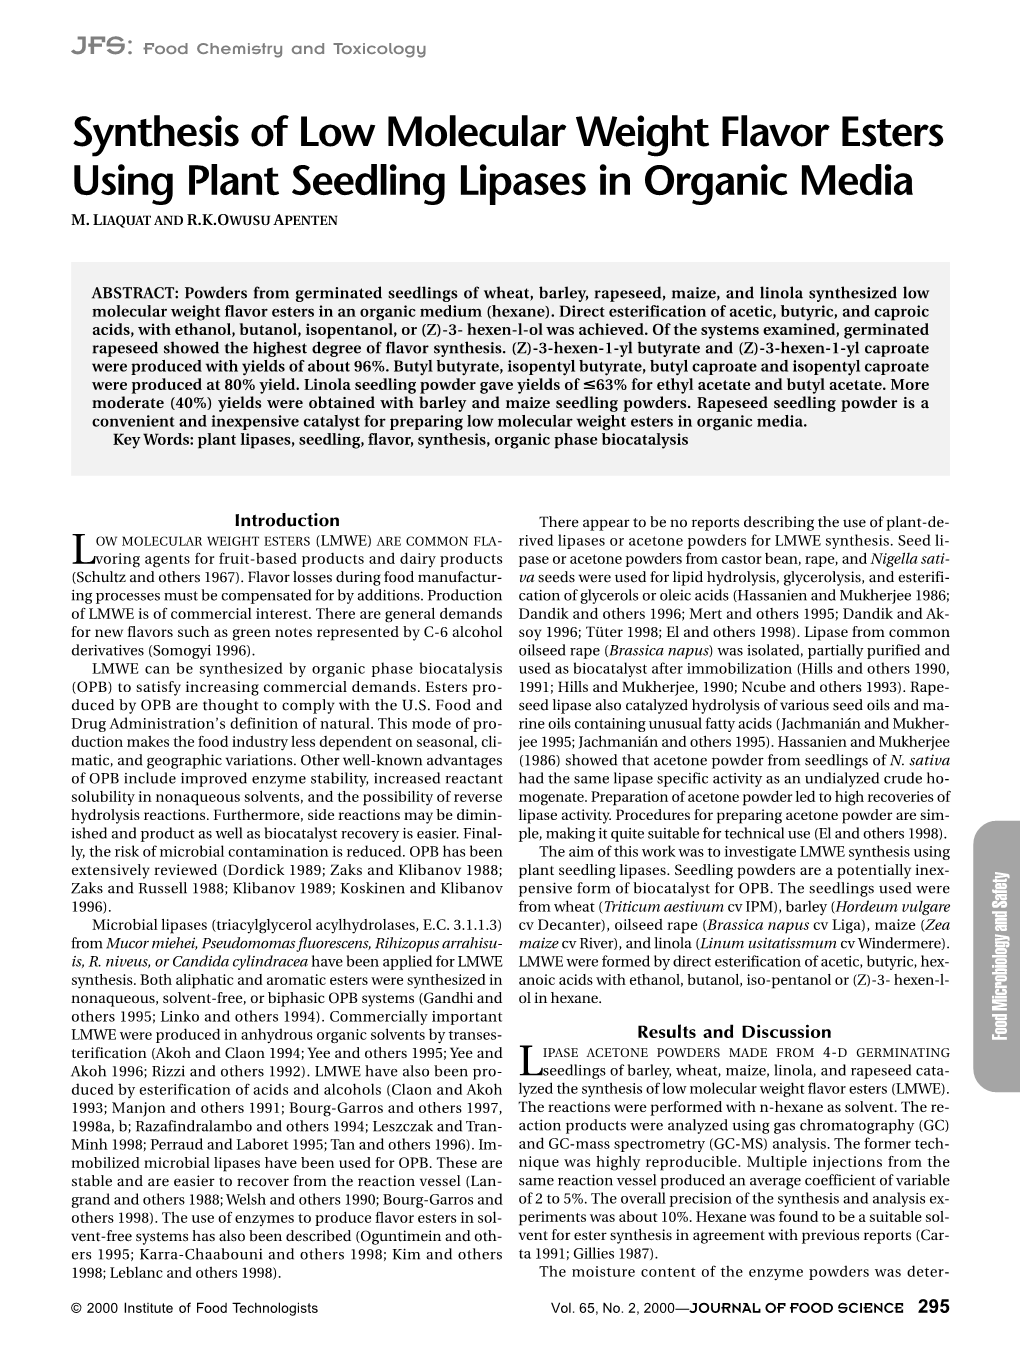 Synthesis of Low Molecular Weight Flavor Esters Using Plant Seedling Lipases in Organic Media M